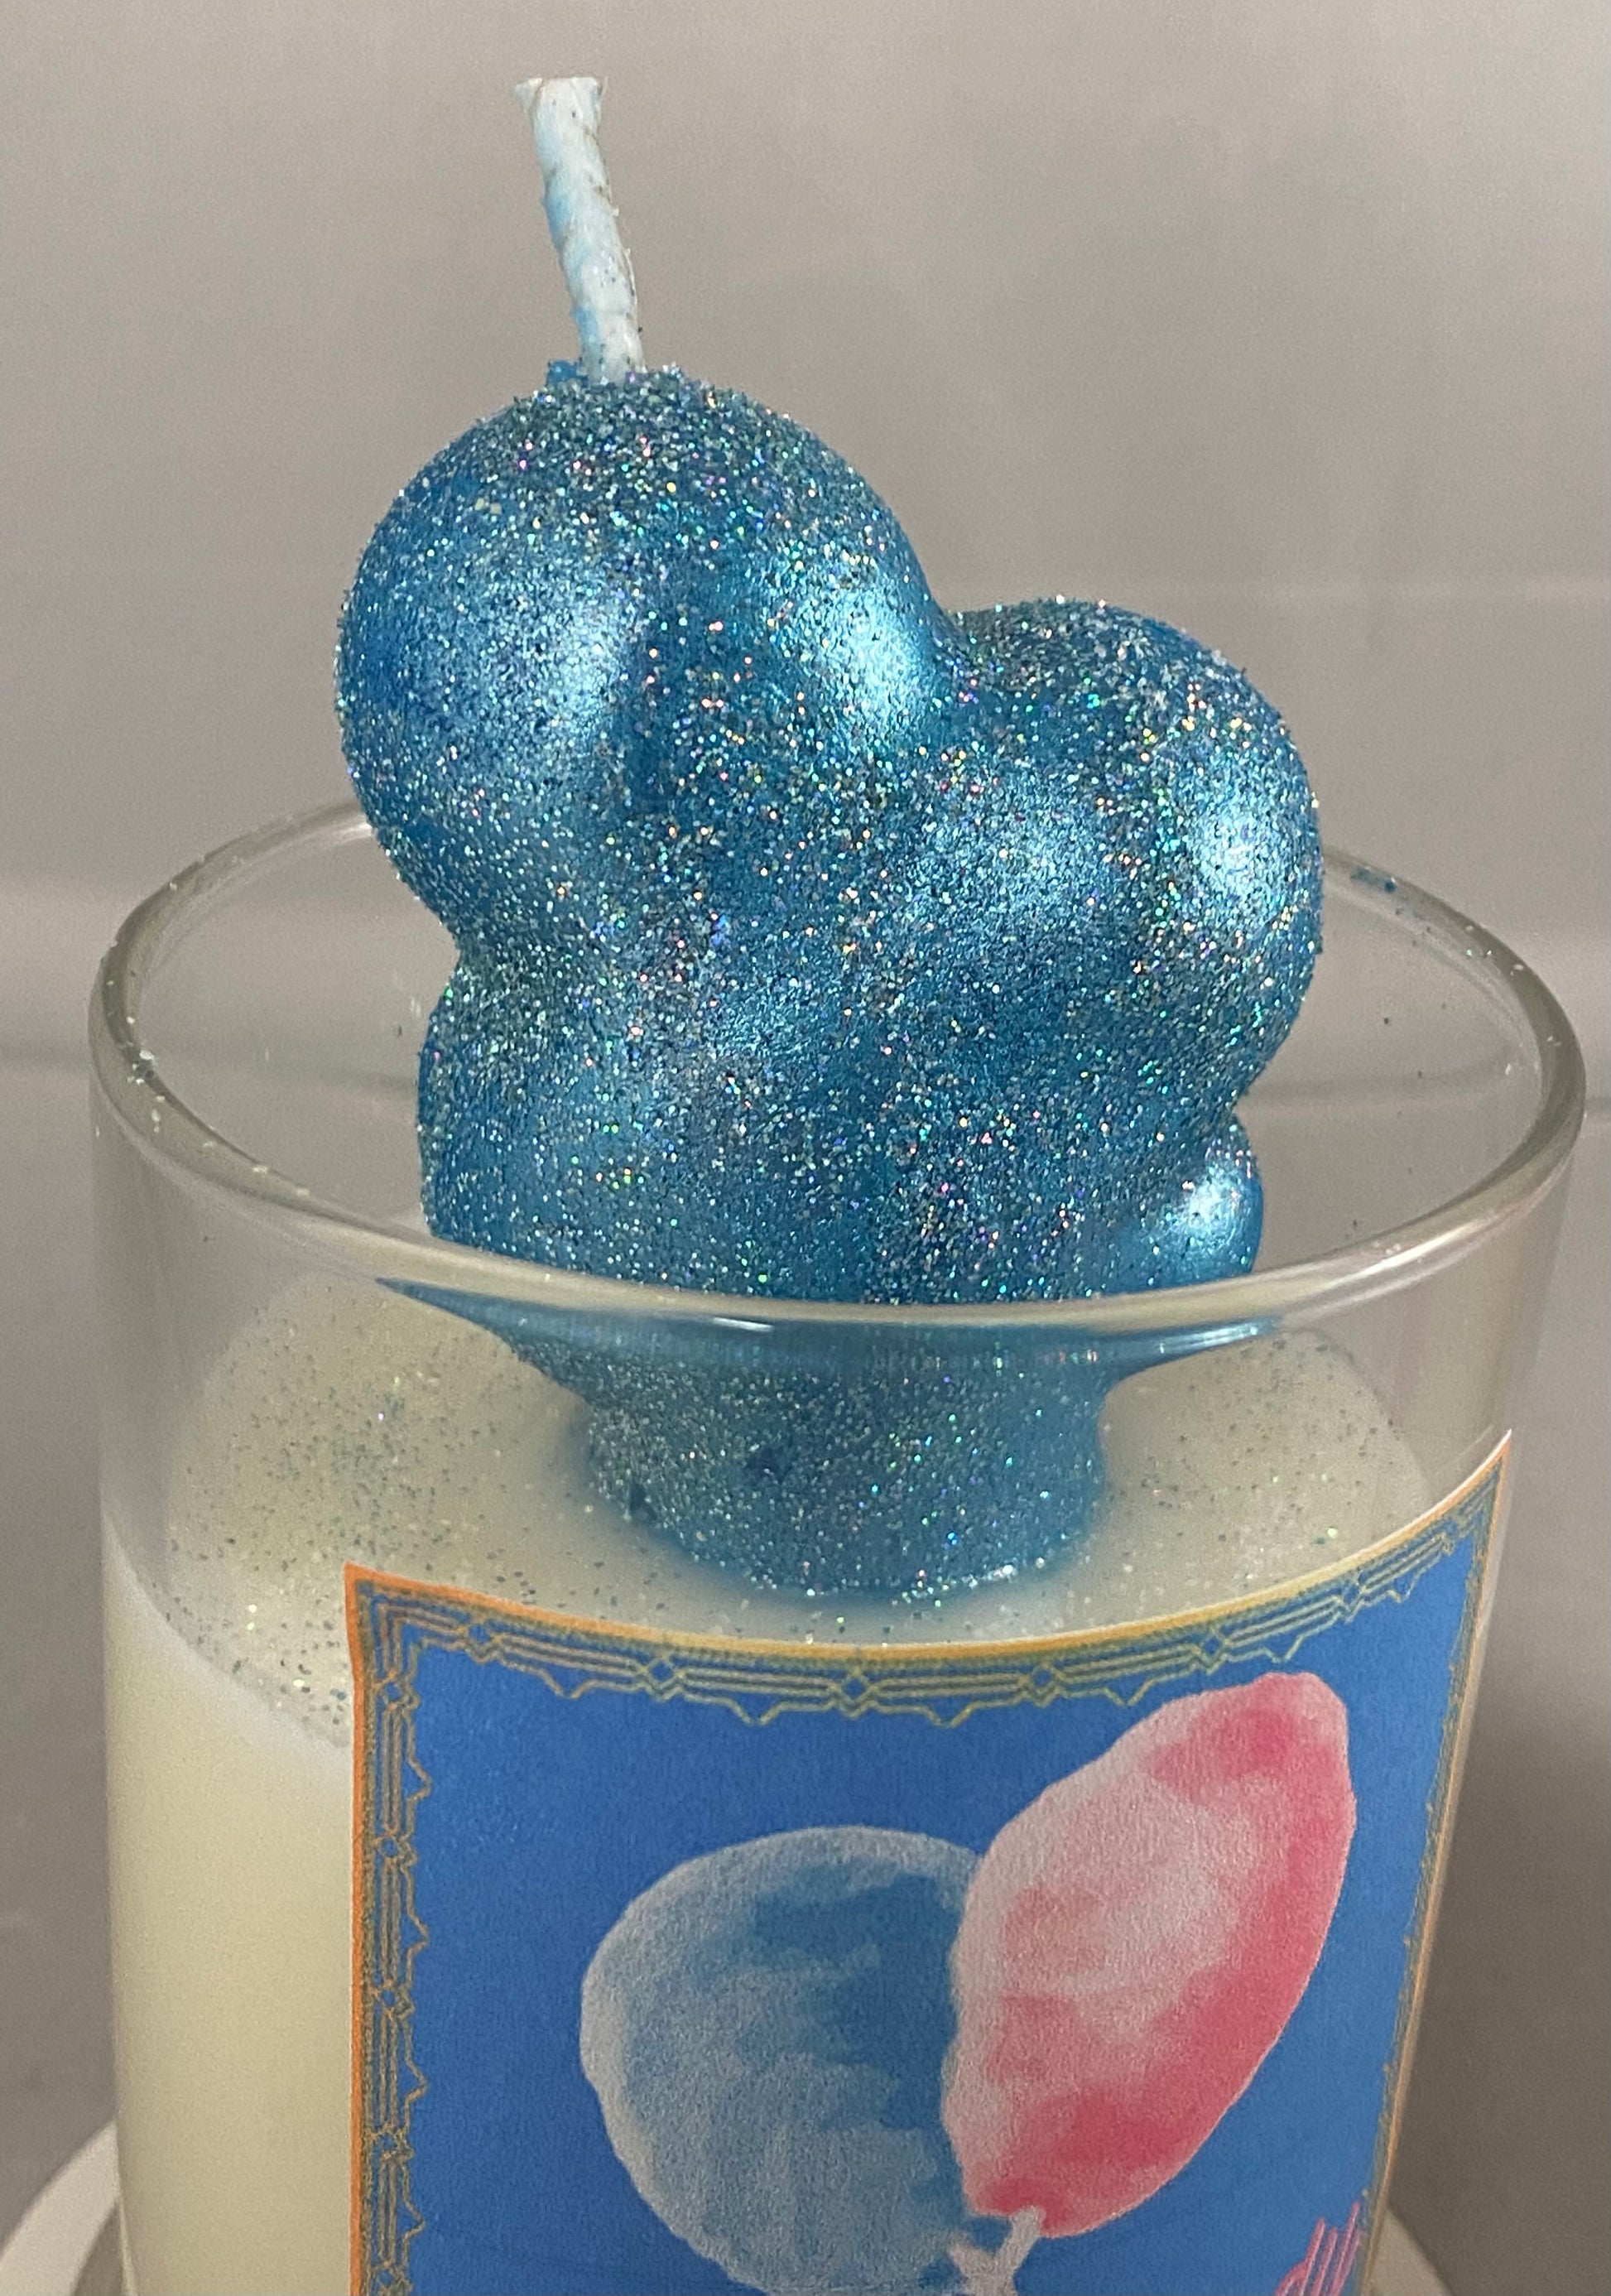 Cotton Candy Candles – Sand Hill Candles & melts